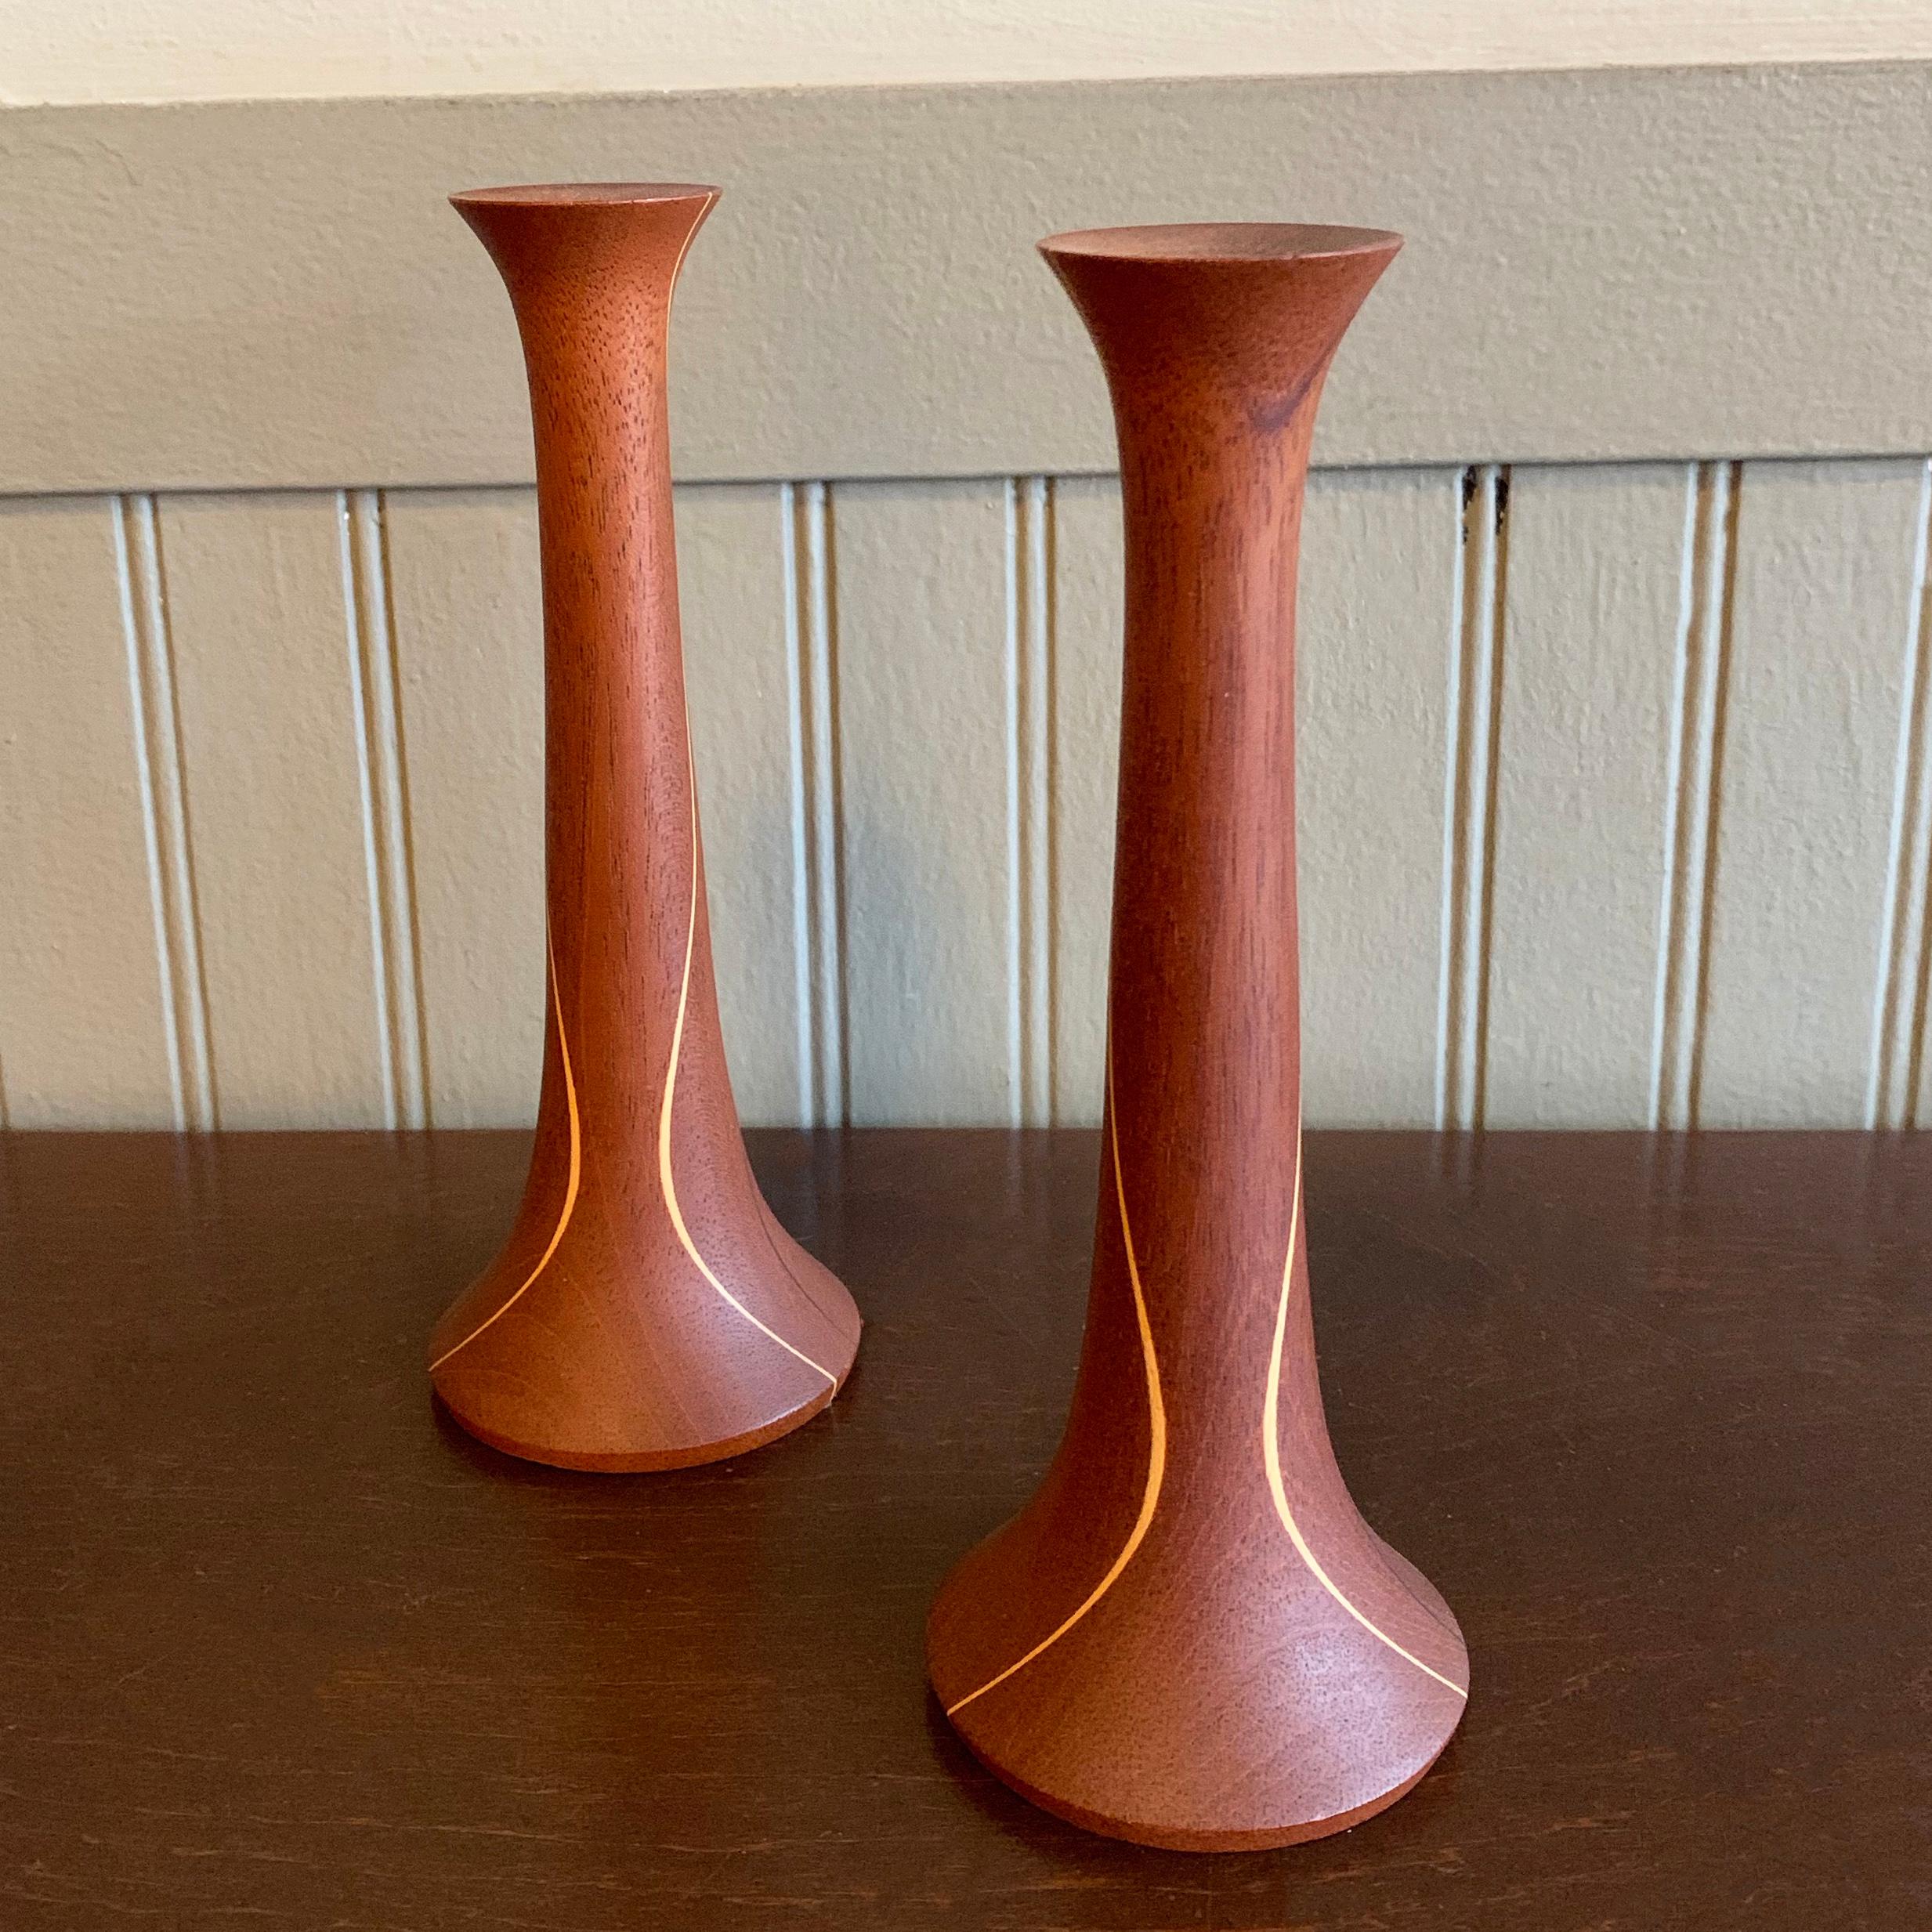 Lovely pair of Mid-Century Modern, hand-turned teak candlestick holders with contrasting inlaid pattern.